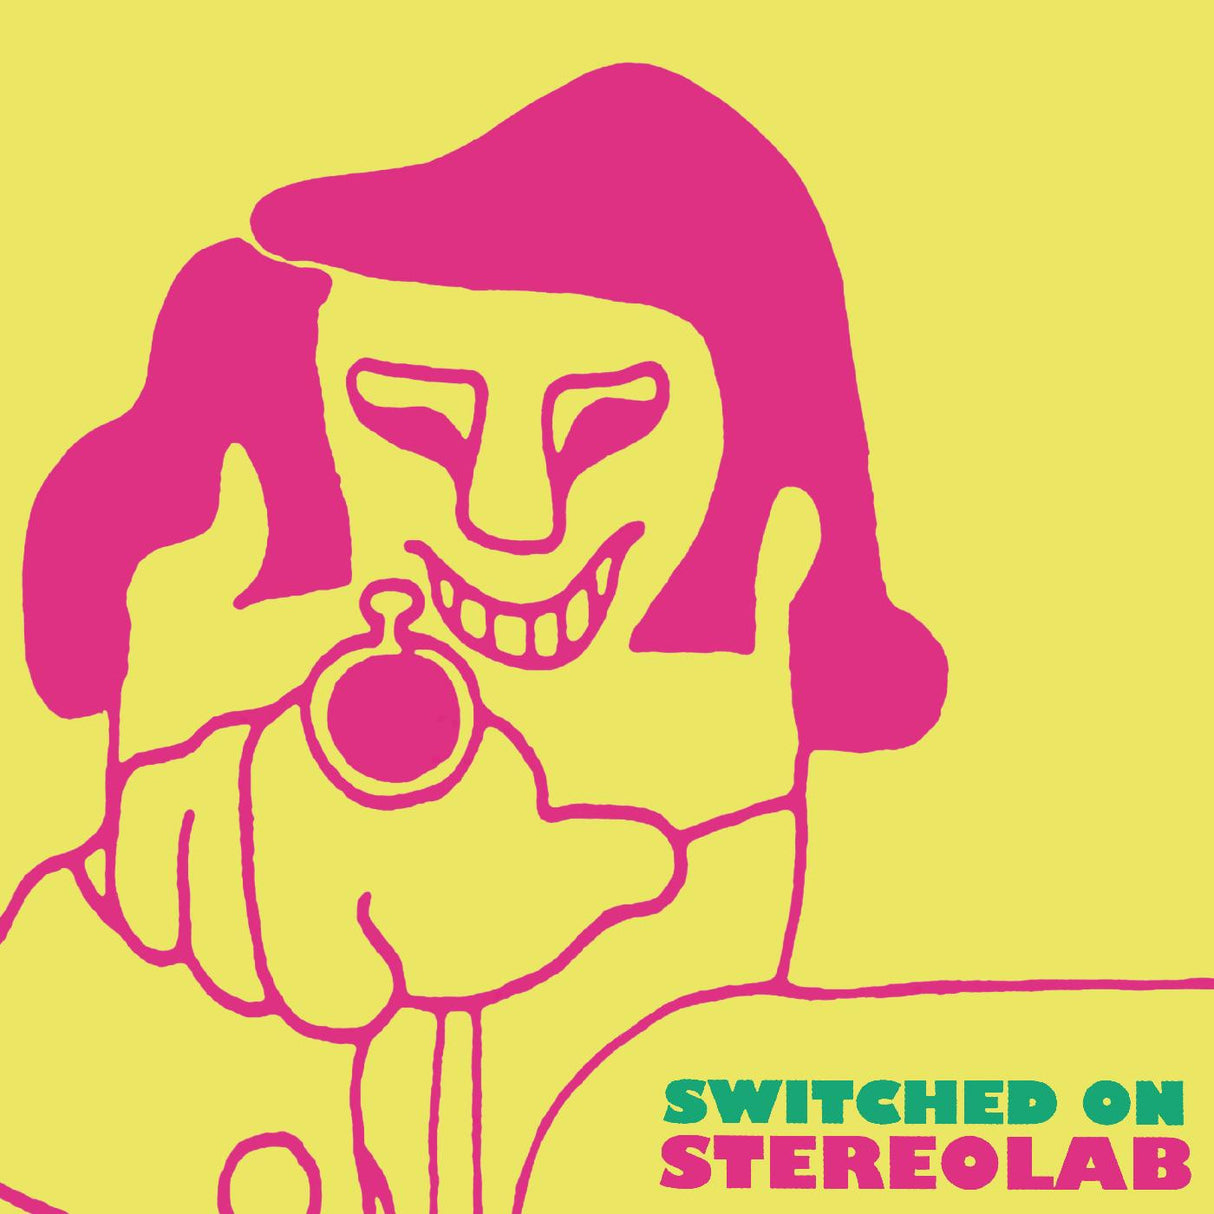 Stereolab - Switched On Volume 1 [Vinyl]